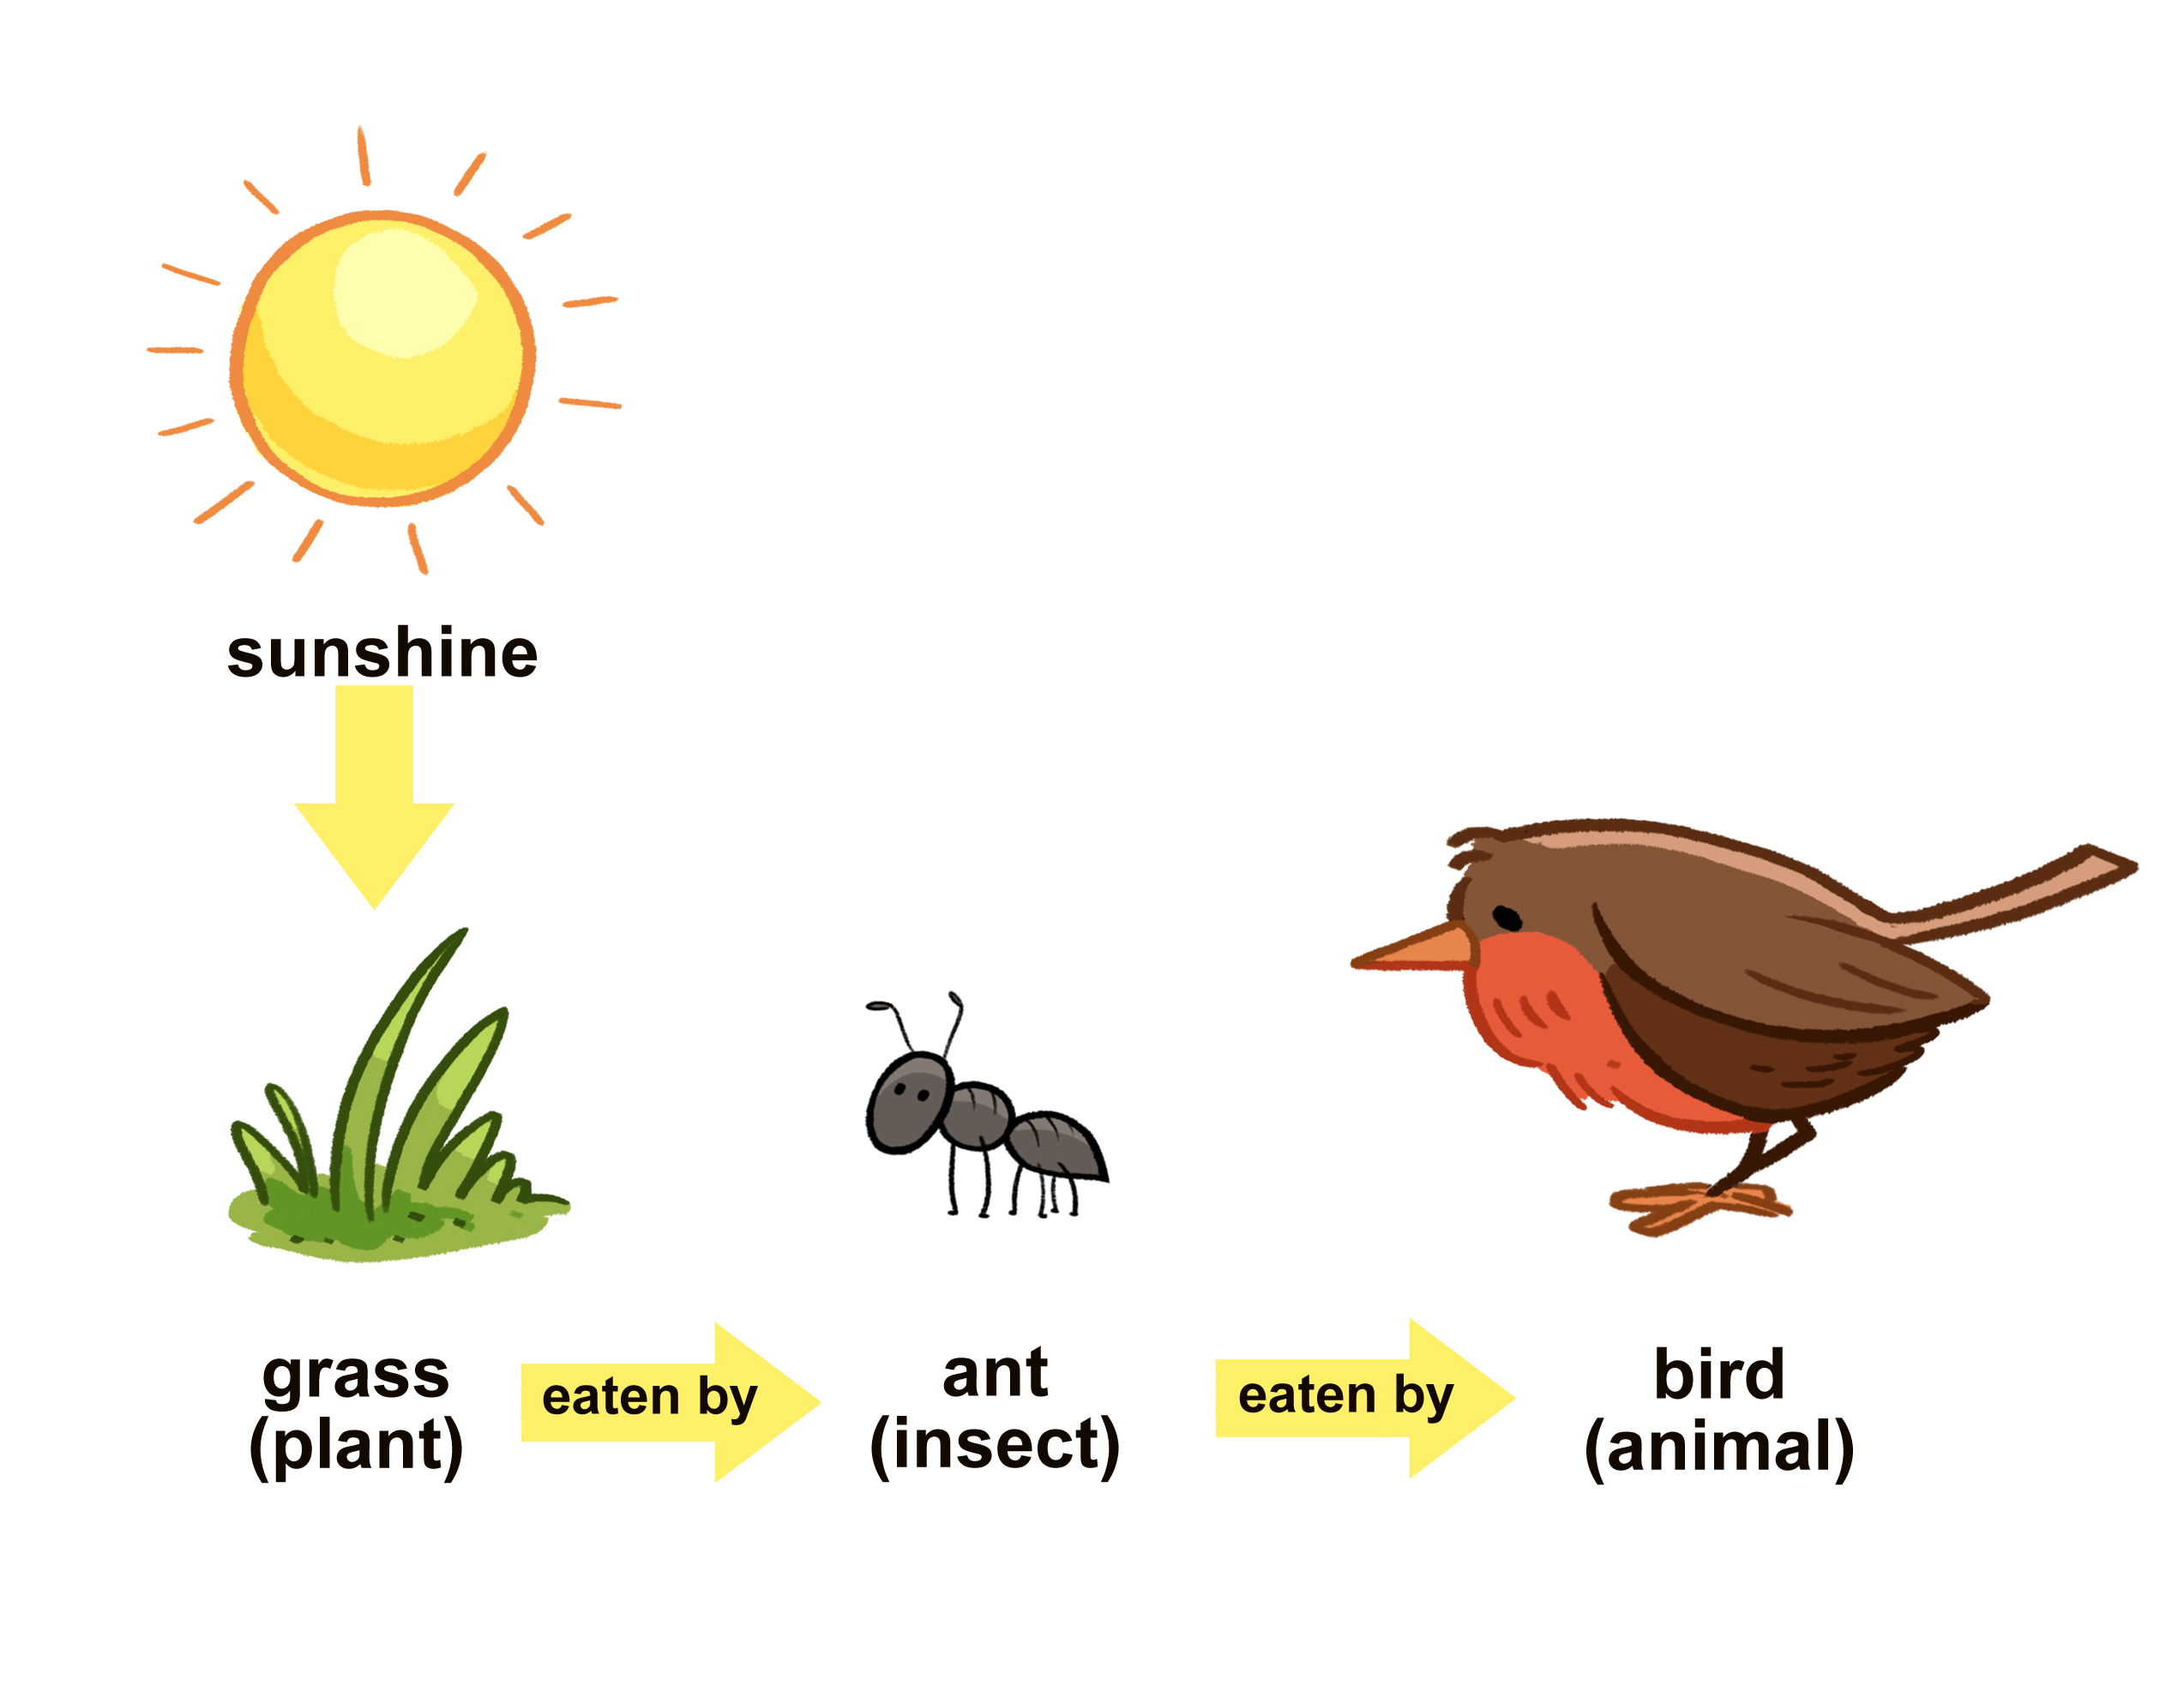 Sun shines down on grass (a plant). Plant is eaten by an ant (insect). Insect is eaten by a bird (animal).